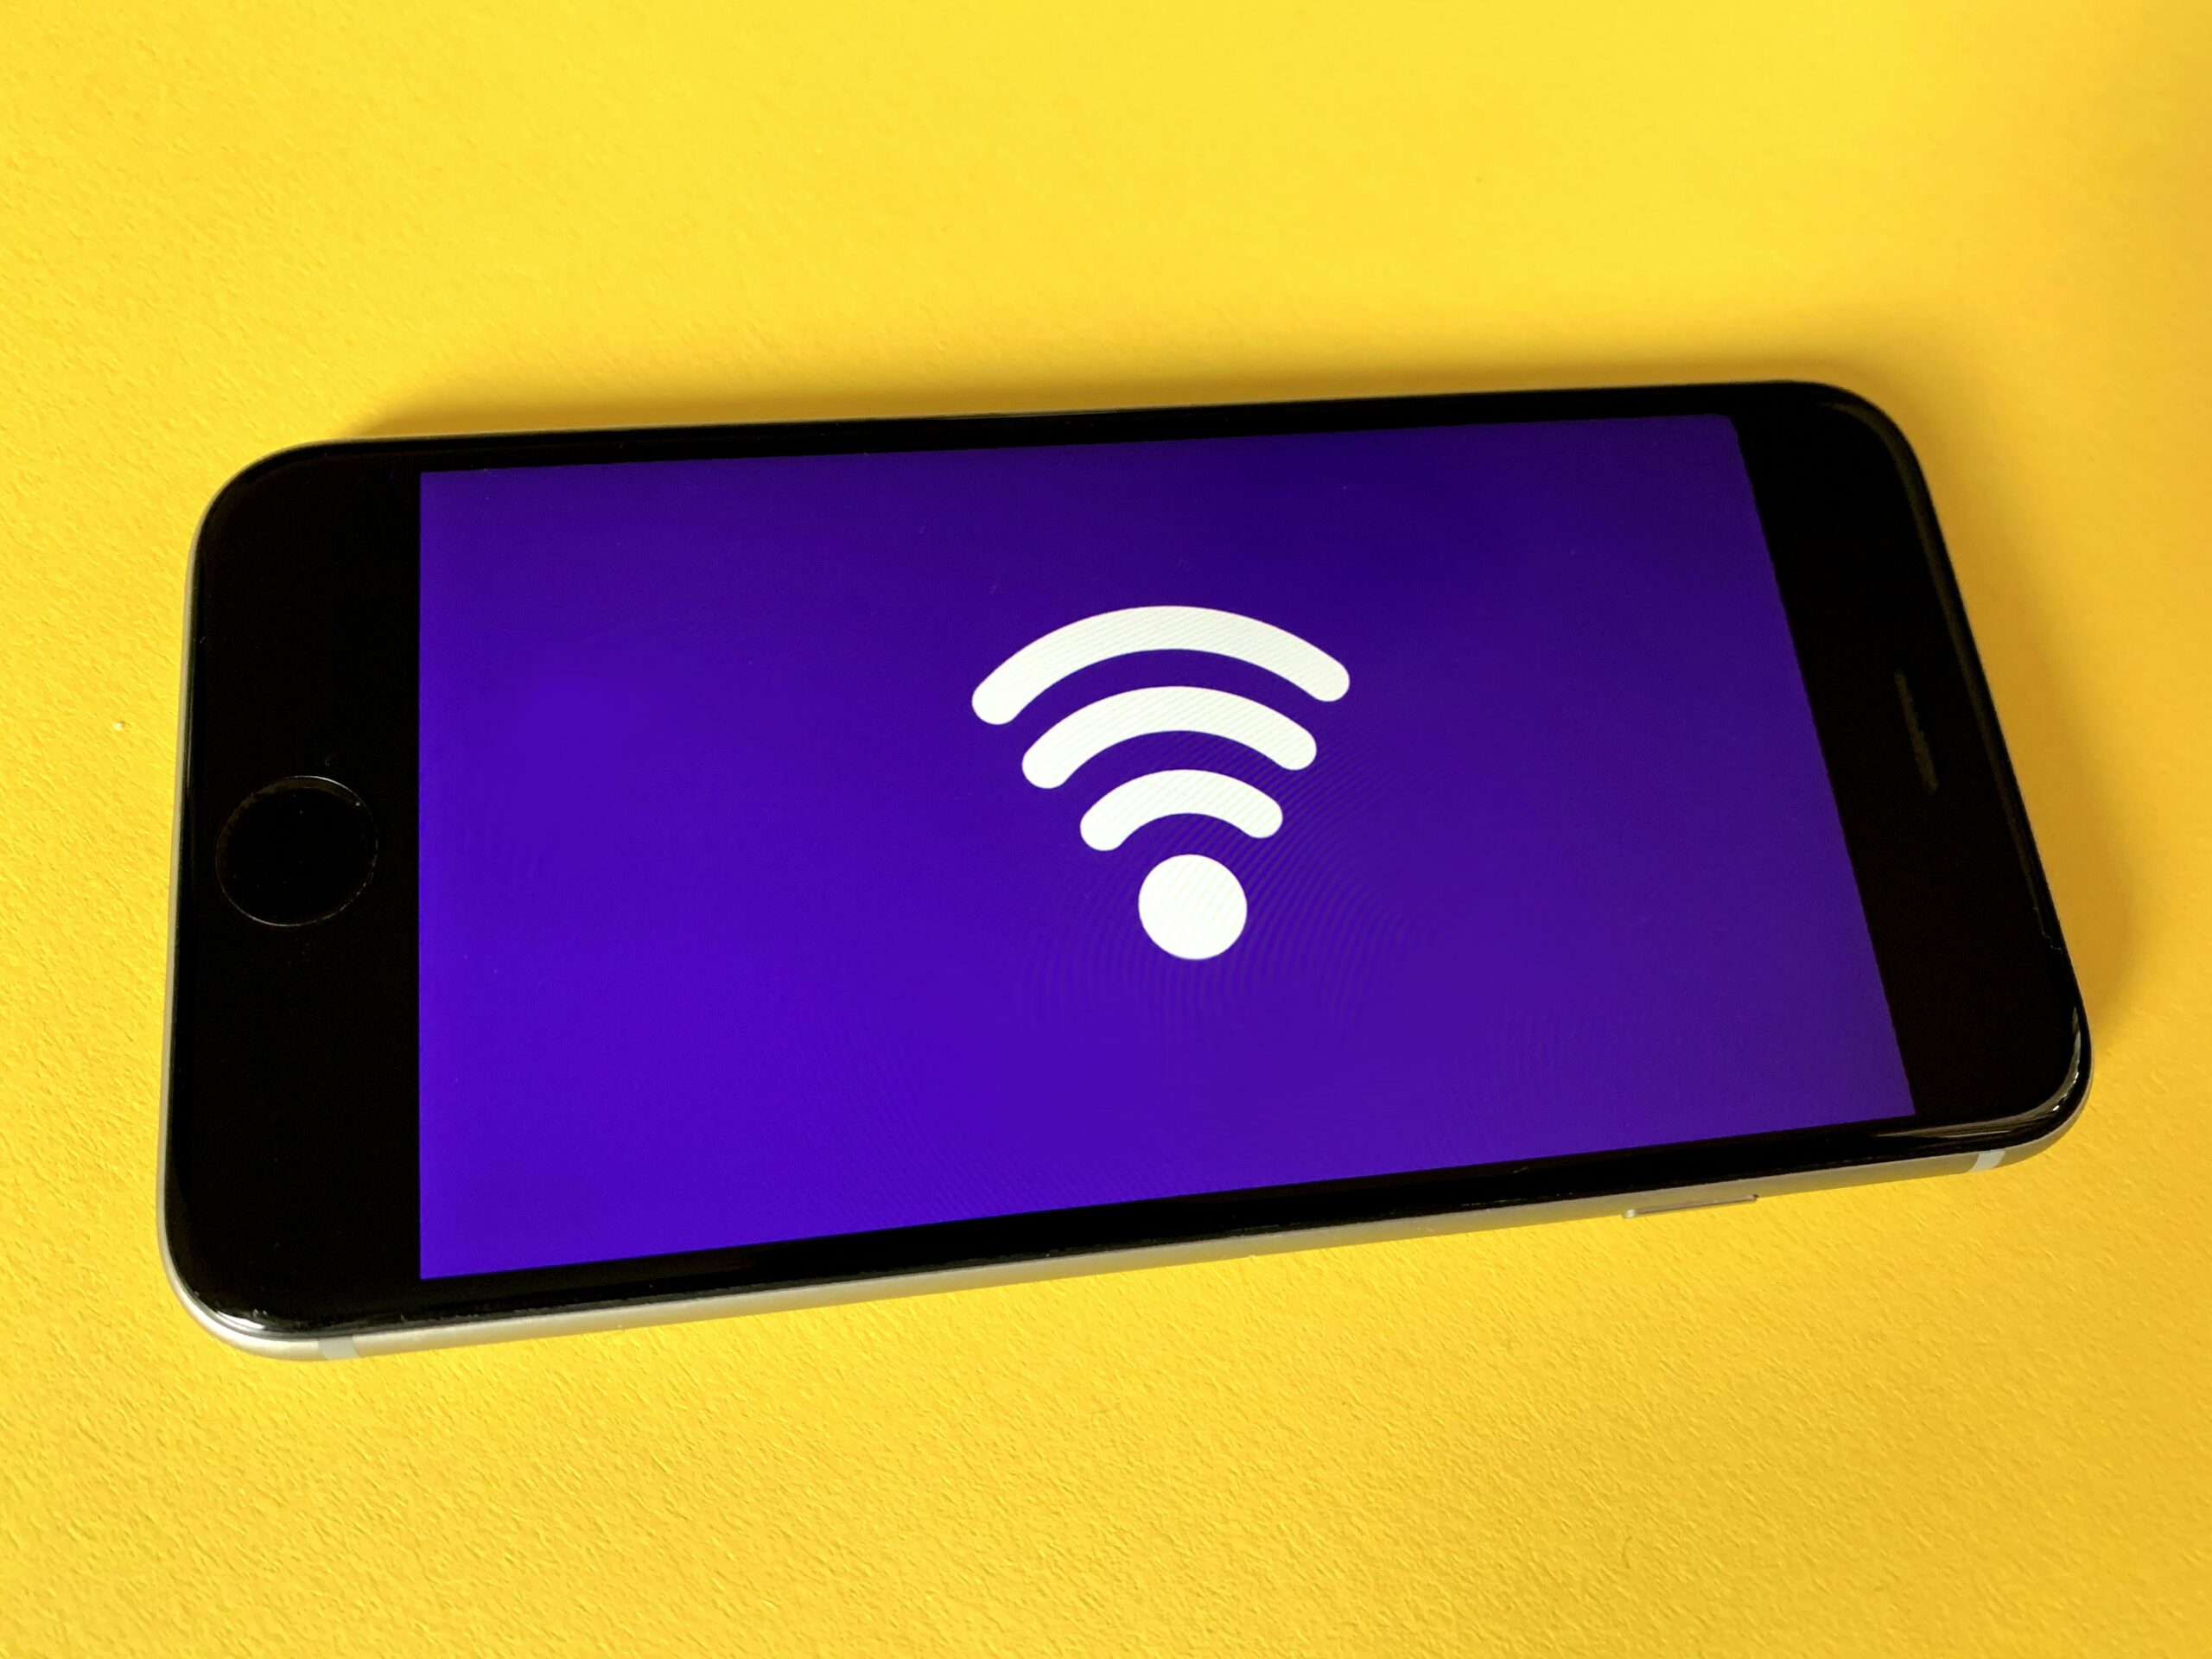 RV Internet Options: The Difference Between Cellular and WiFi